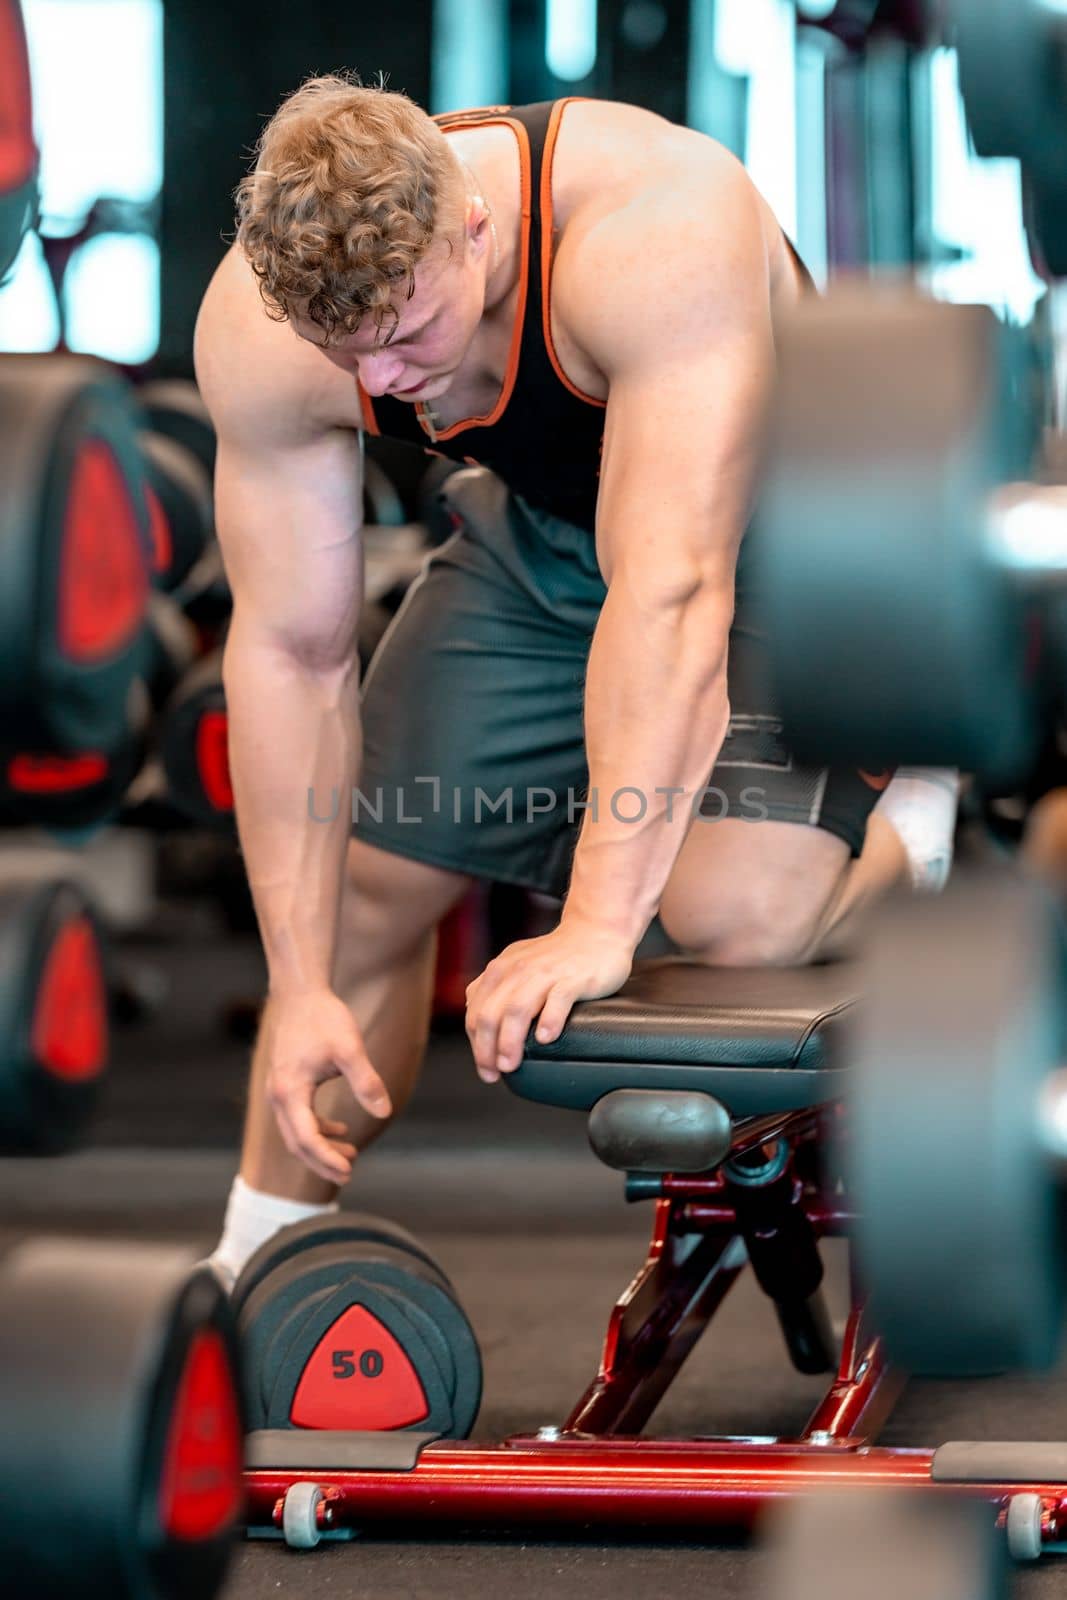 one-handed dumbbell pull-ups in a forward bend on a bench. High quality photo